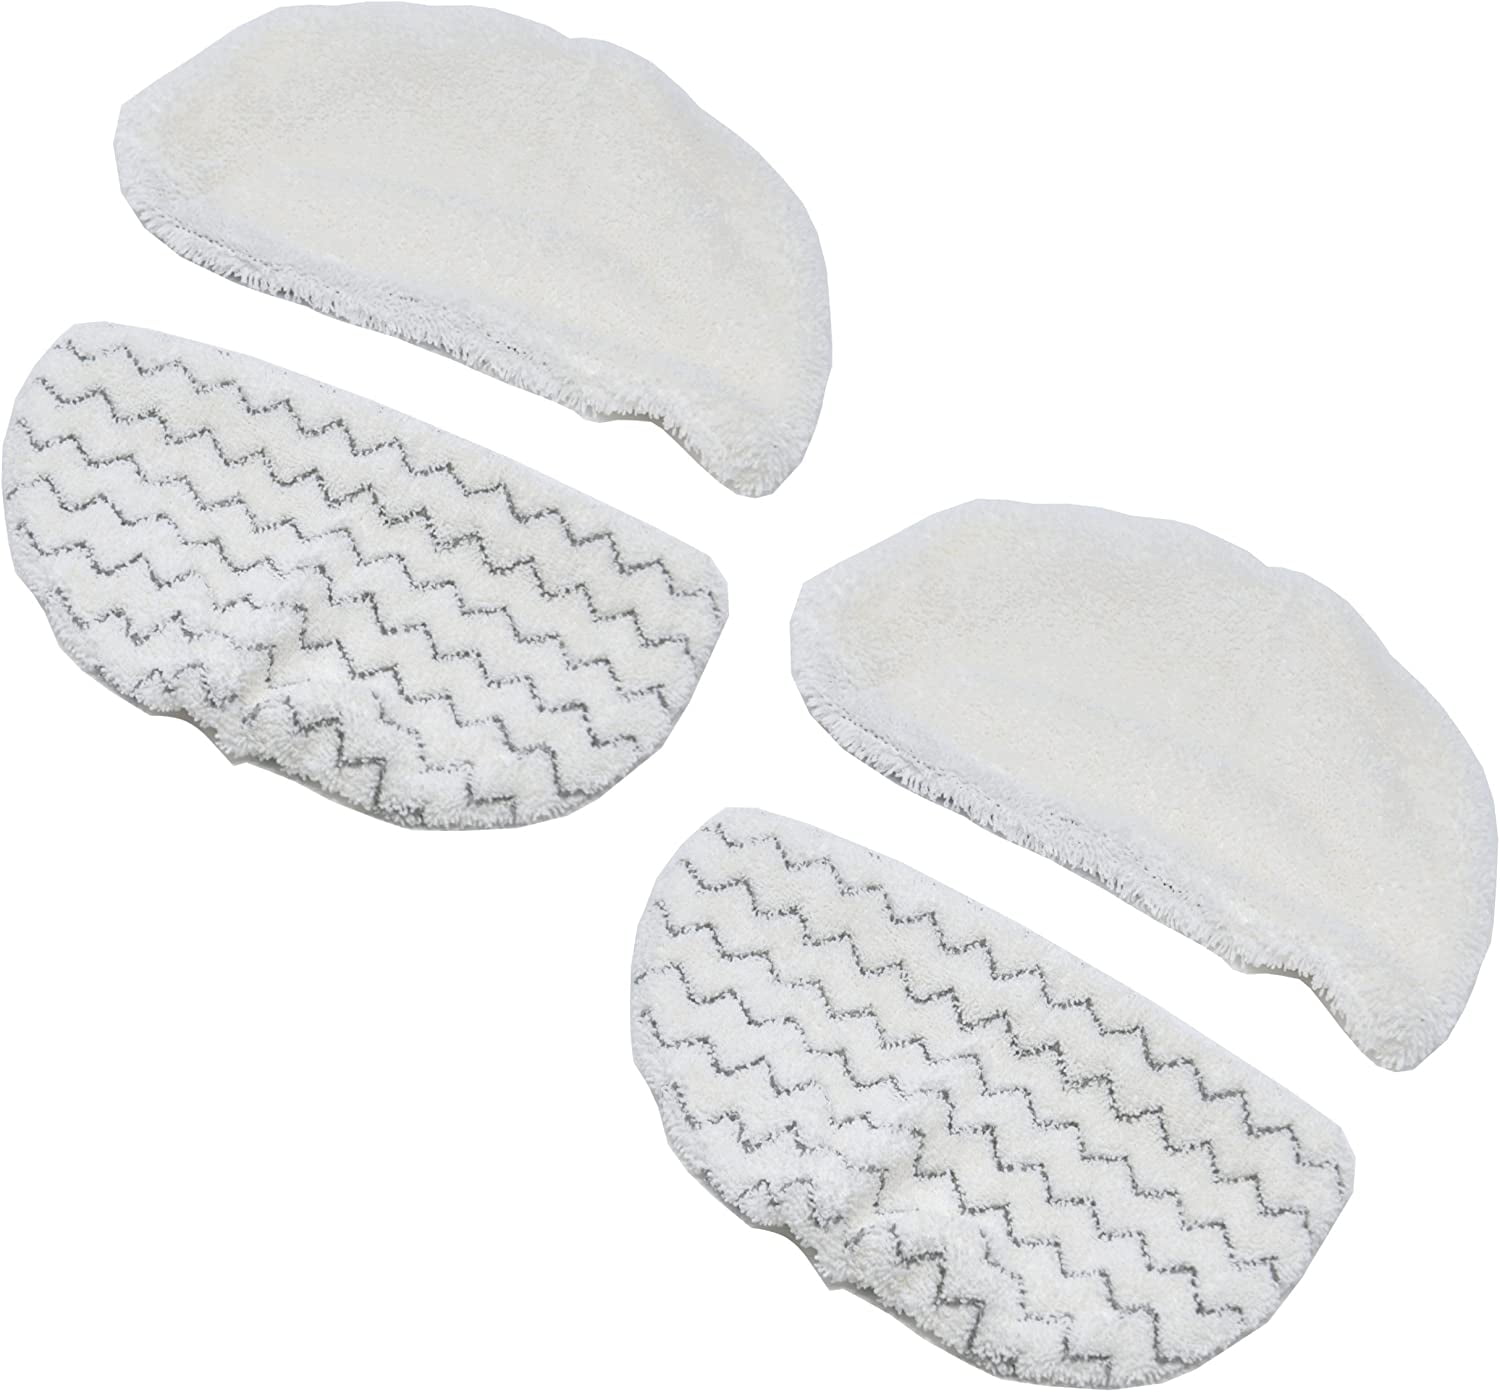 Green Label Brand 2 Pack Replacement Microfiber Steam Mop Pads For Bissell Power